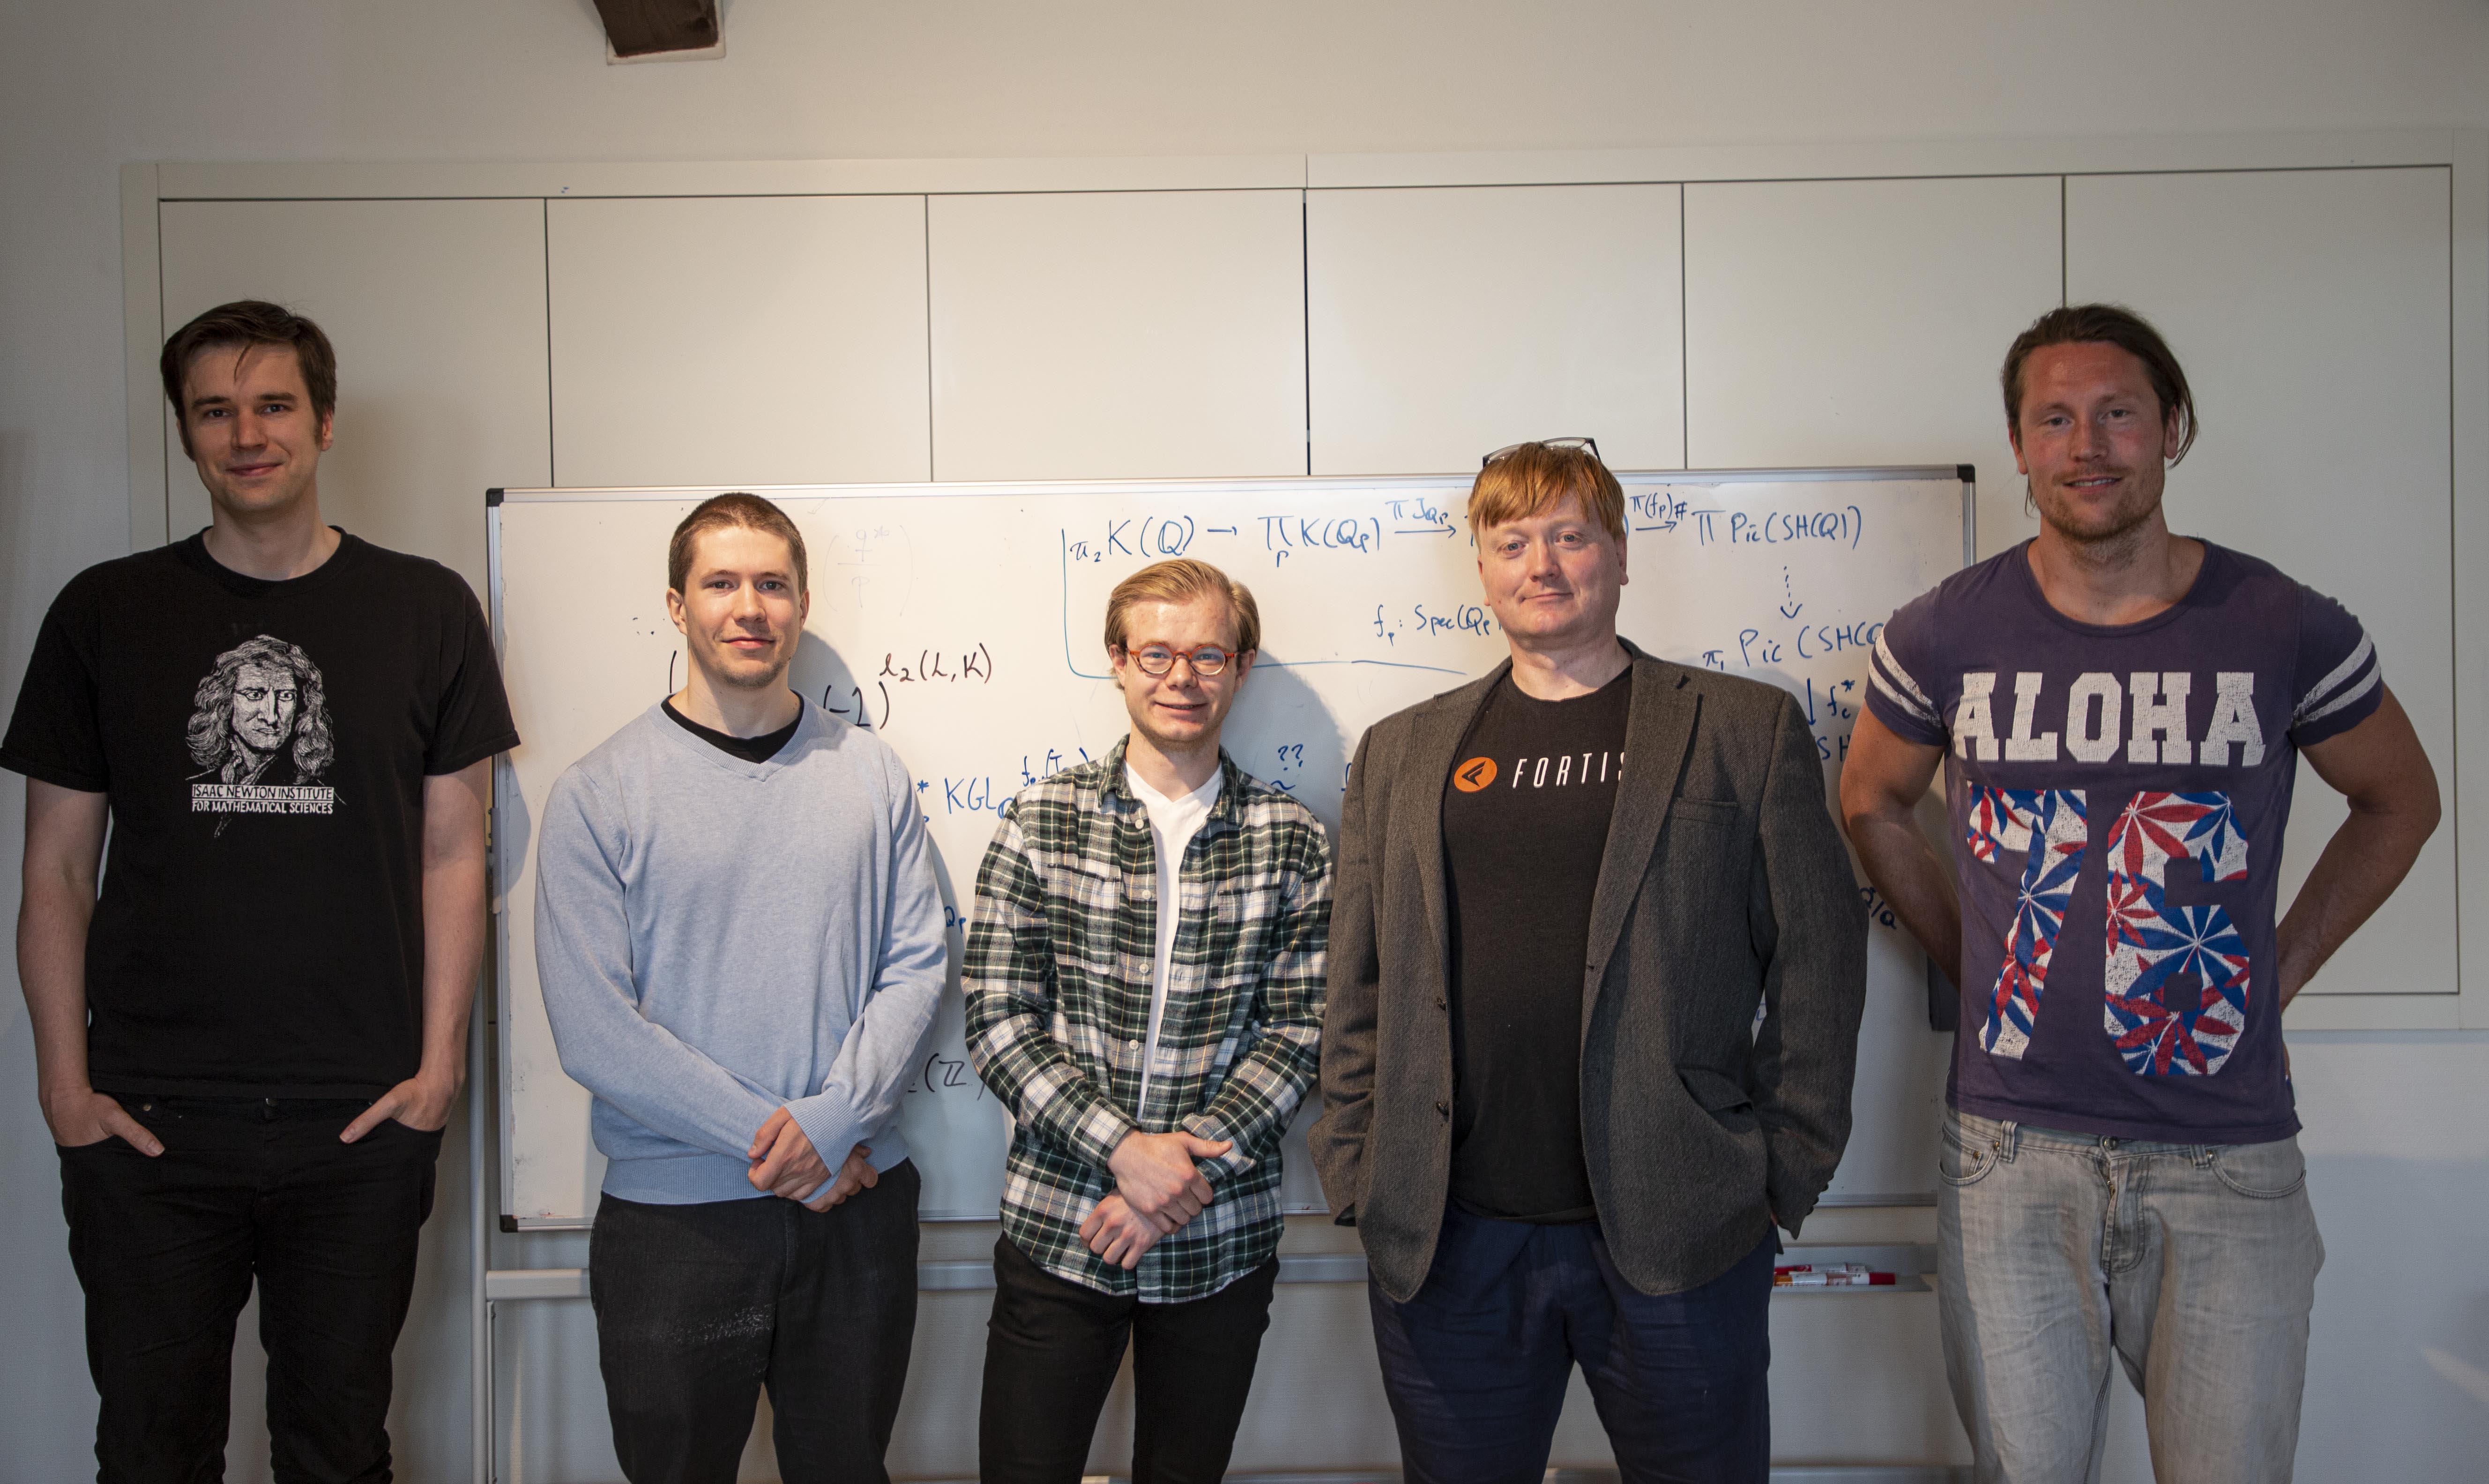 Project leader Paul Arne Østvær together with four of his project participants. From the left: John Christian Ottem, professor at UiO, Dr. Håkon Kolderup, Nikolai Thode Opdan, a master’s degree student at UiO, and Ola Sande, a Ph.D. candidate at UiO. Photo: Marit Fiksdal / Centre for Advanced Study (CAS)